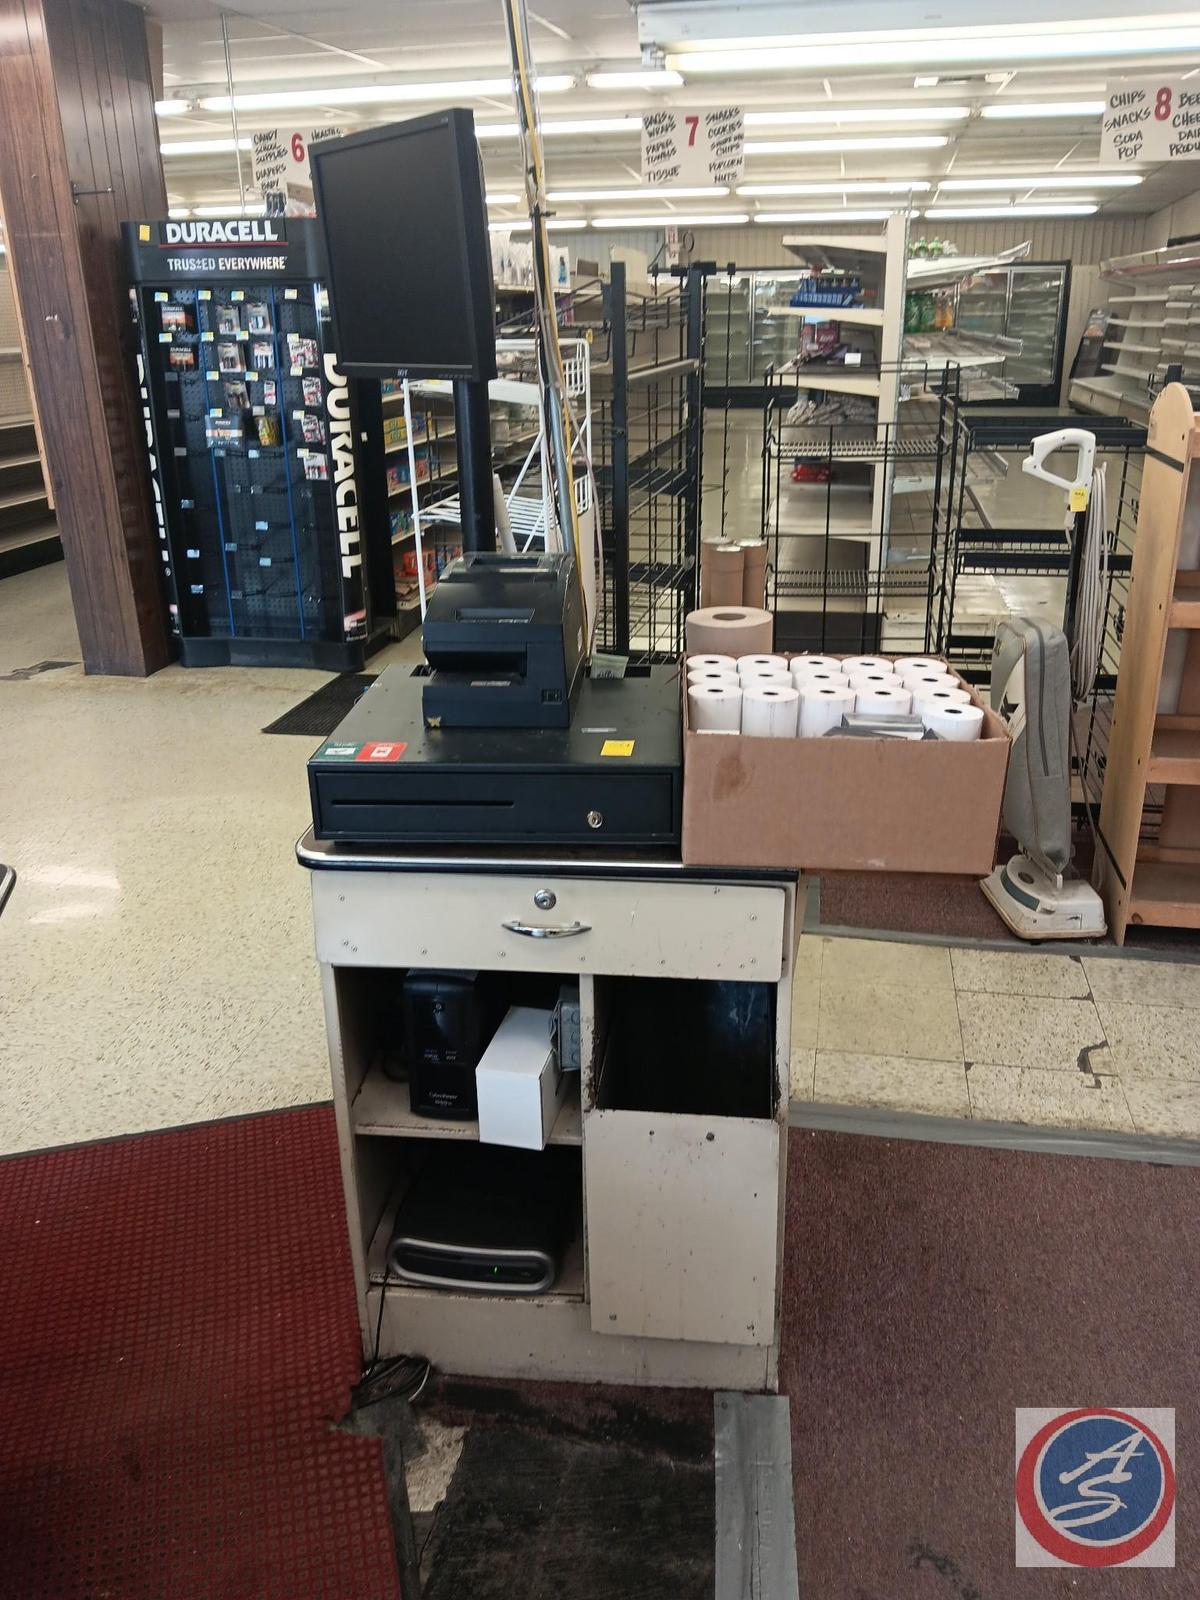 Register, Printer, Screen, and Stand